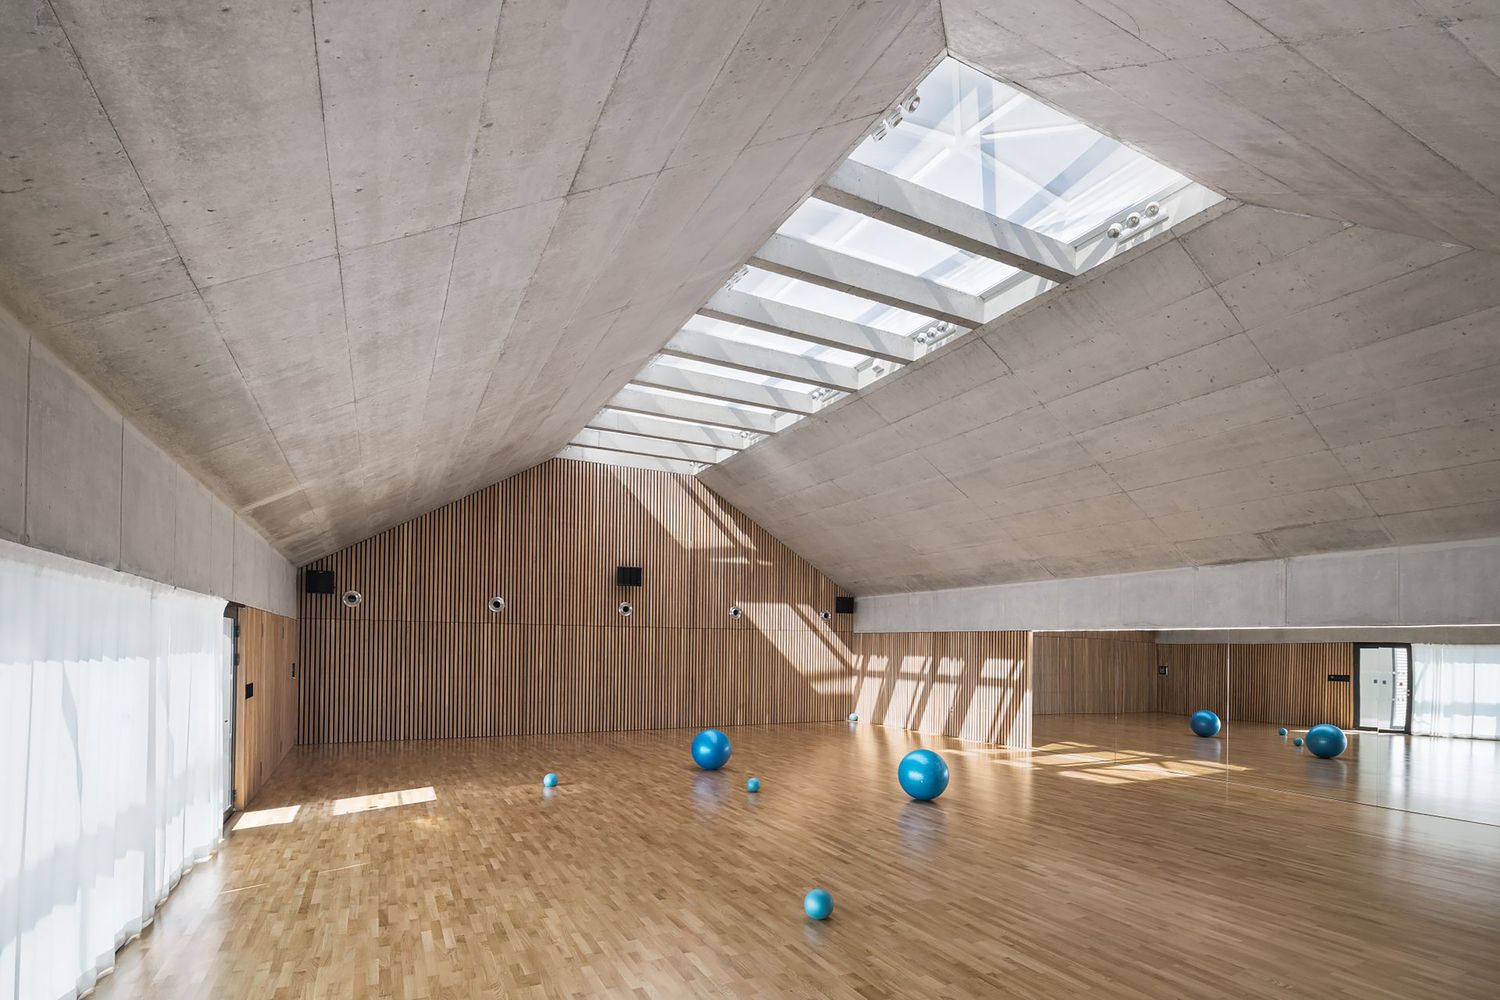 A Czech sports hall that has the courage to be moderate